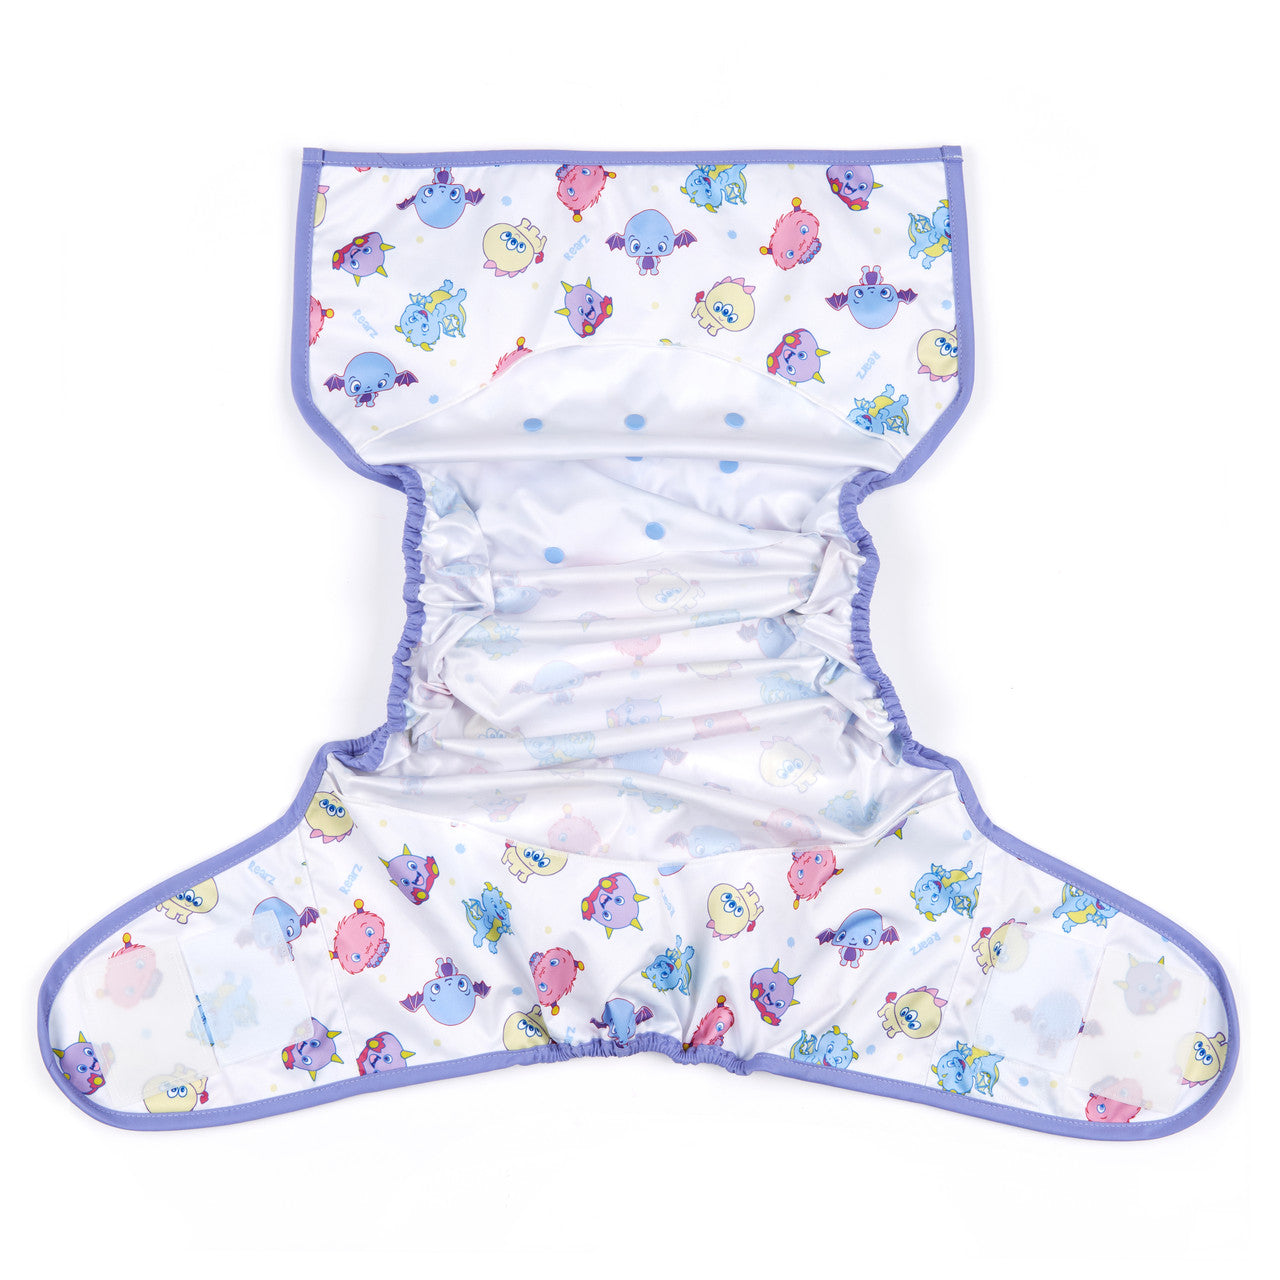 Rearz - Adult Diaper Cover/Wrap - Lil' Monsters